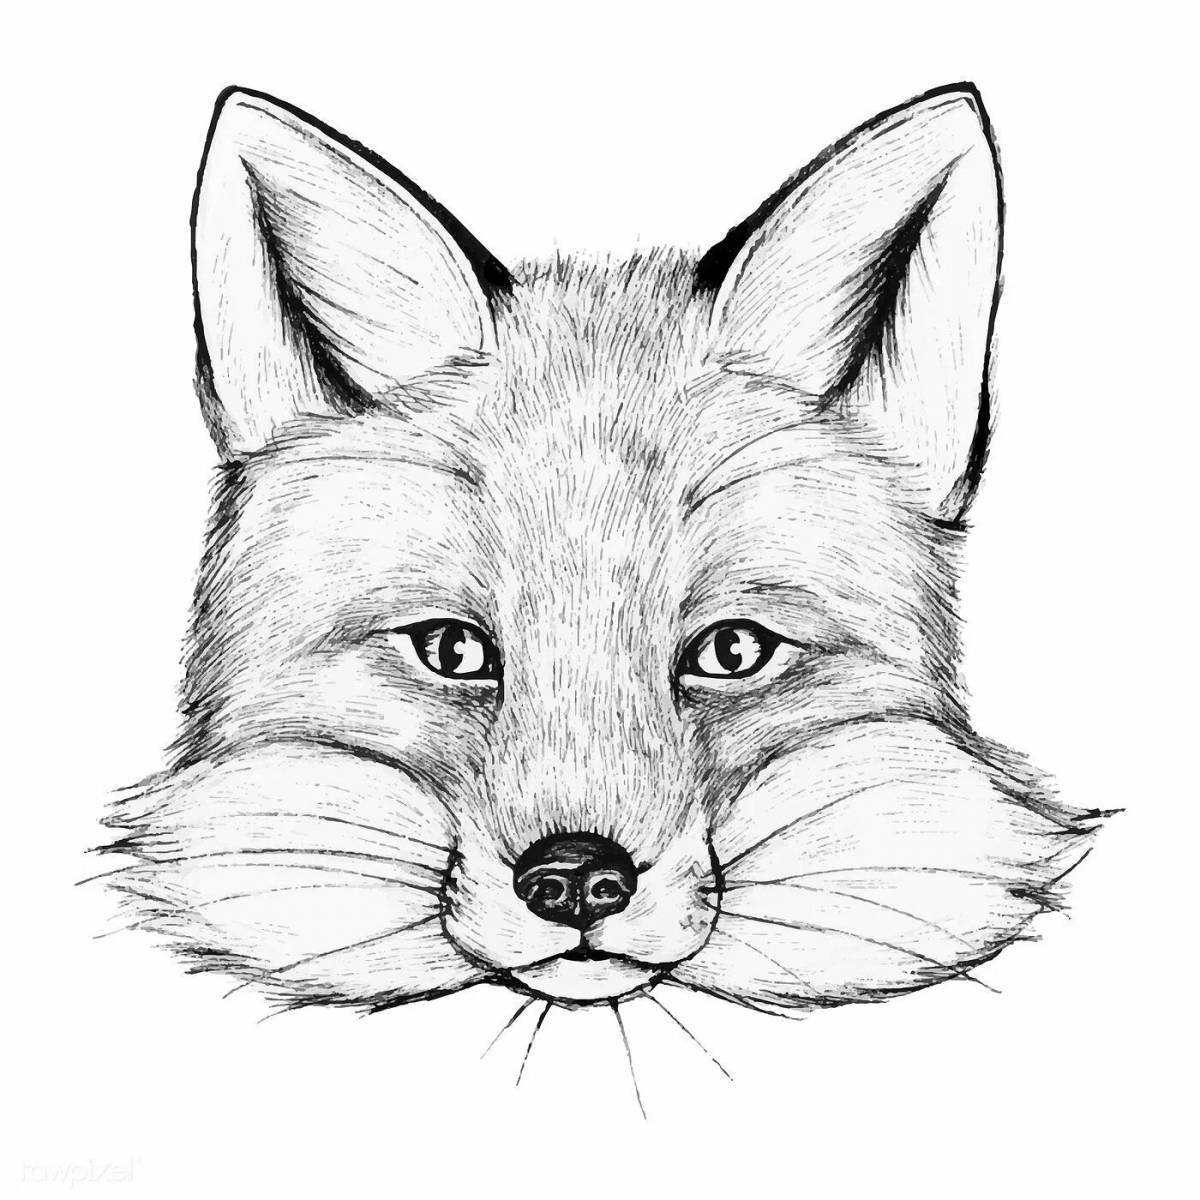 Coloring page exquisite fox face